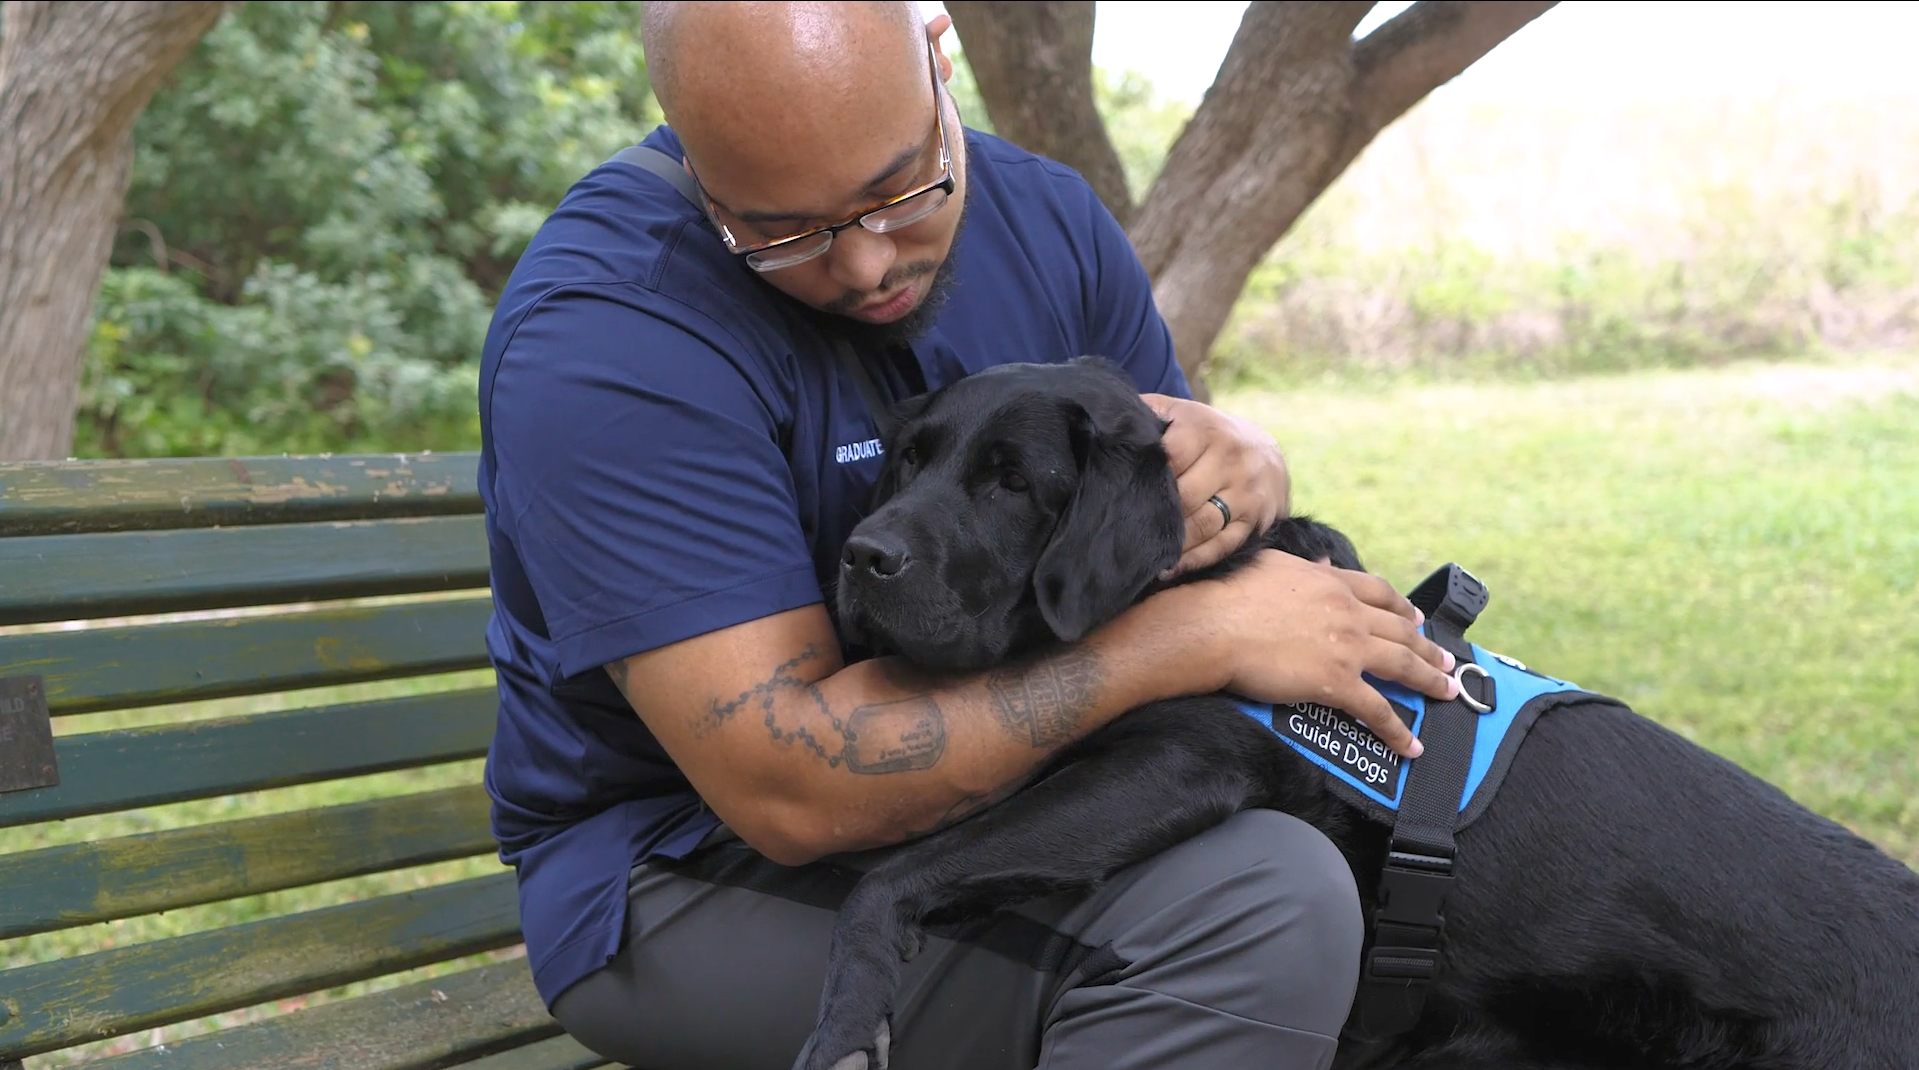 Veteran man sits on bench with black service dog on his lap